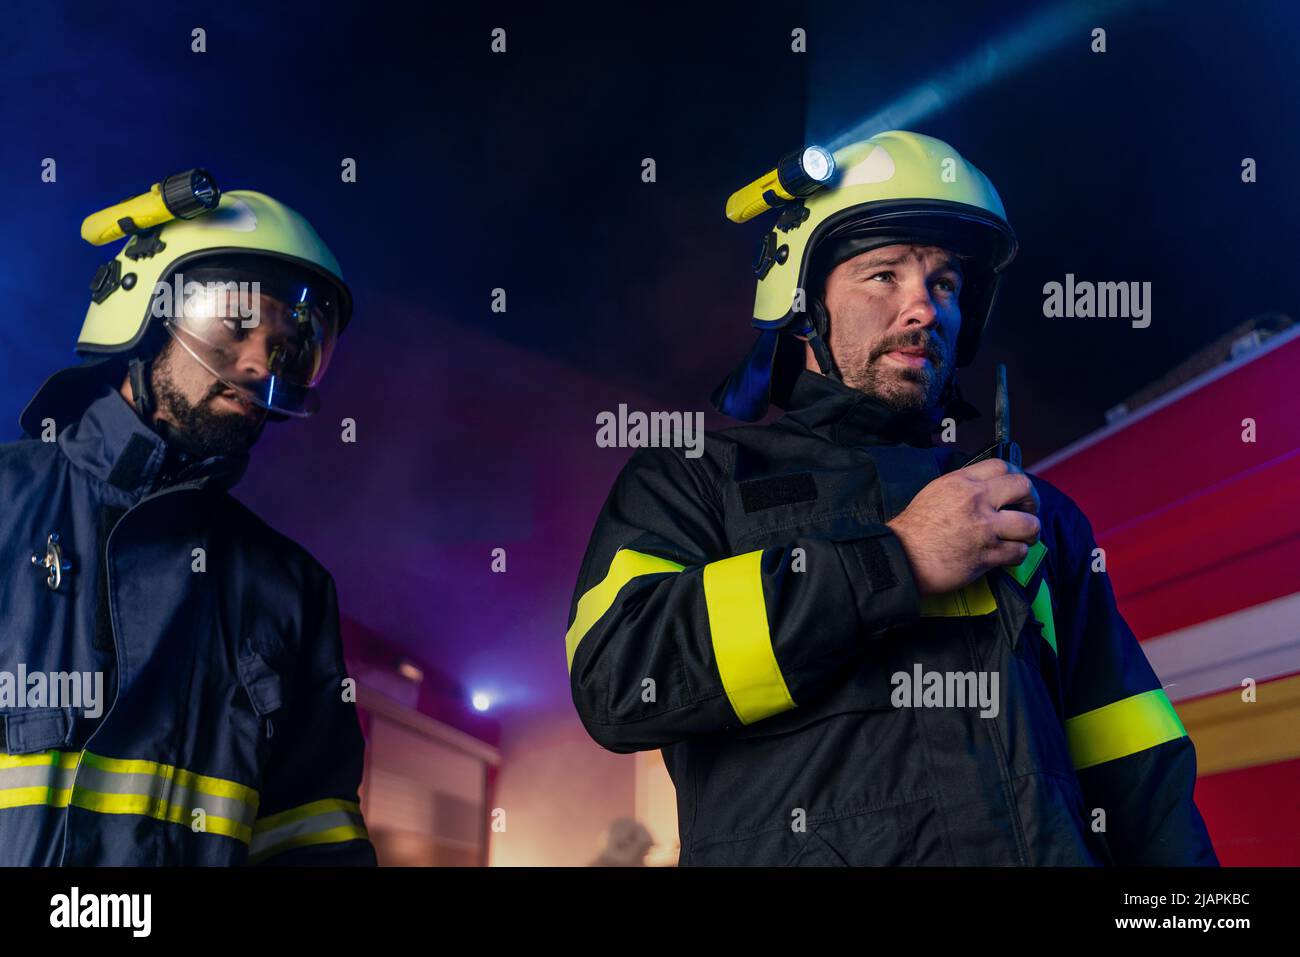 Firefighter talking to walkie talkie with fire truck in background at night. Stock Photo